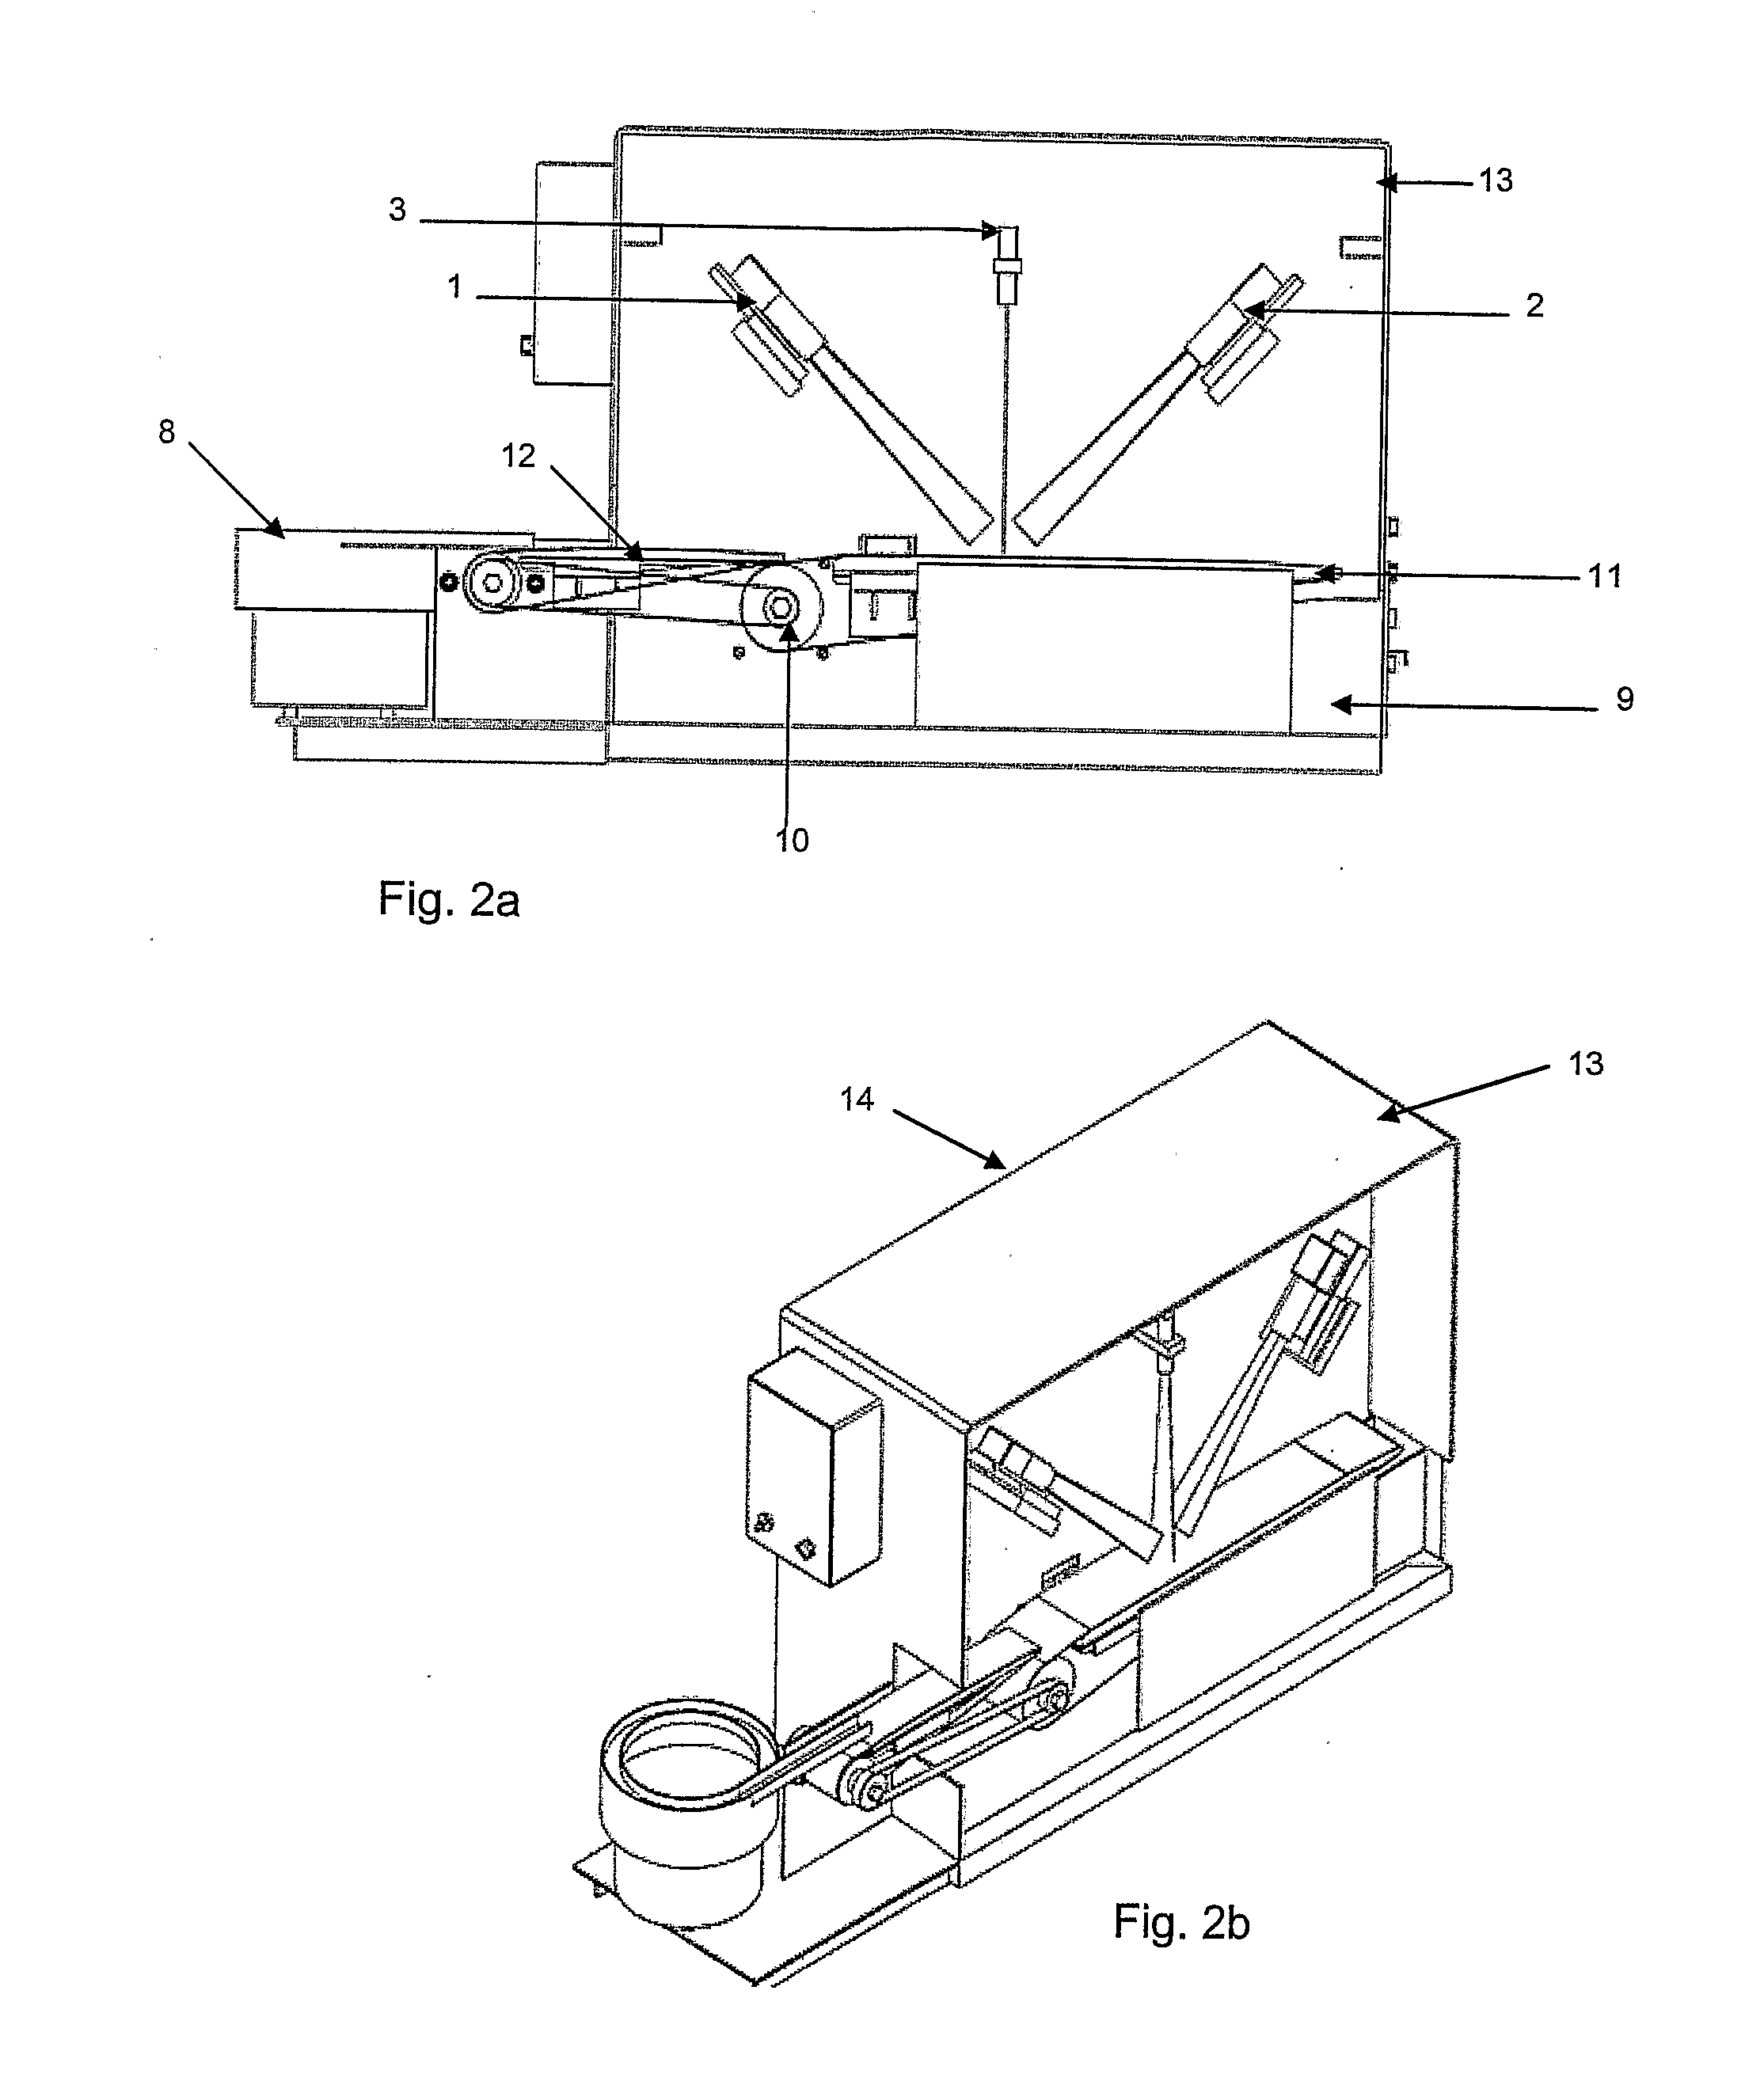 Apparatus and Method For Analysis of Size, Form and Angularity and For Compositional Analysis of Mineral and Rock Particles